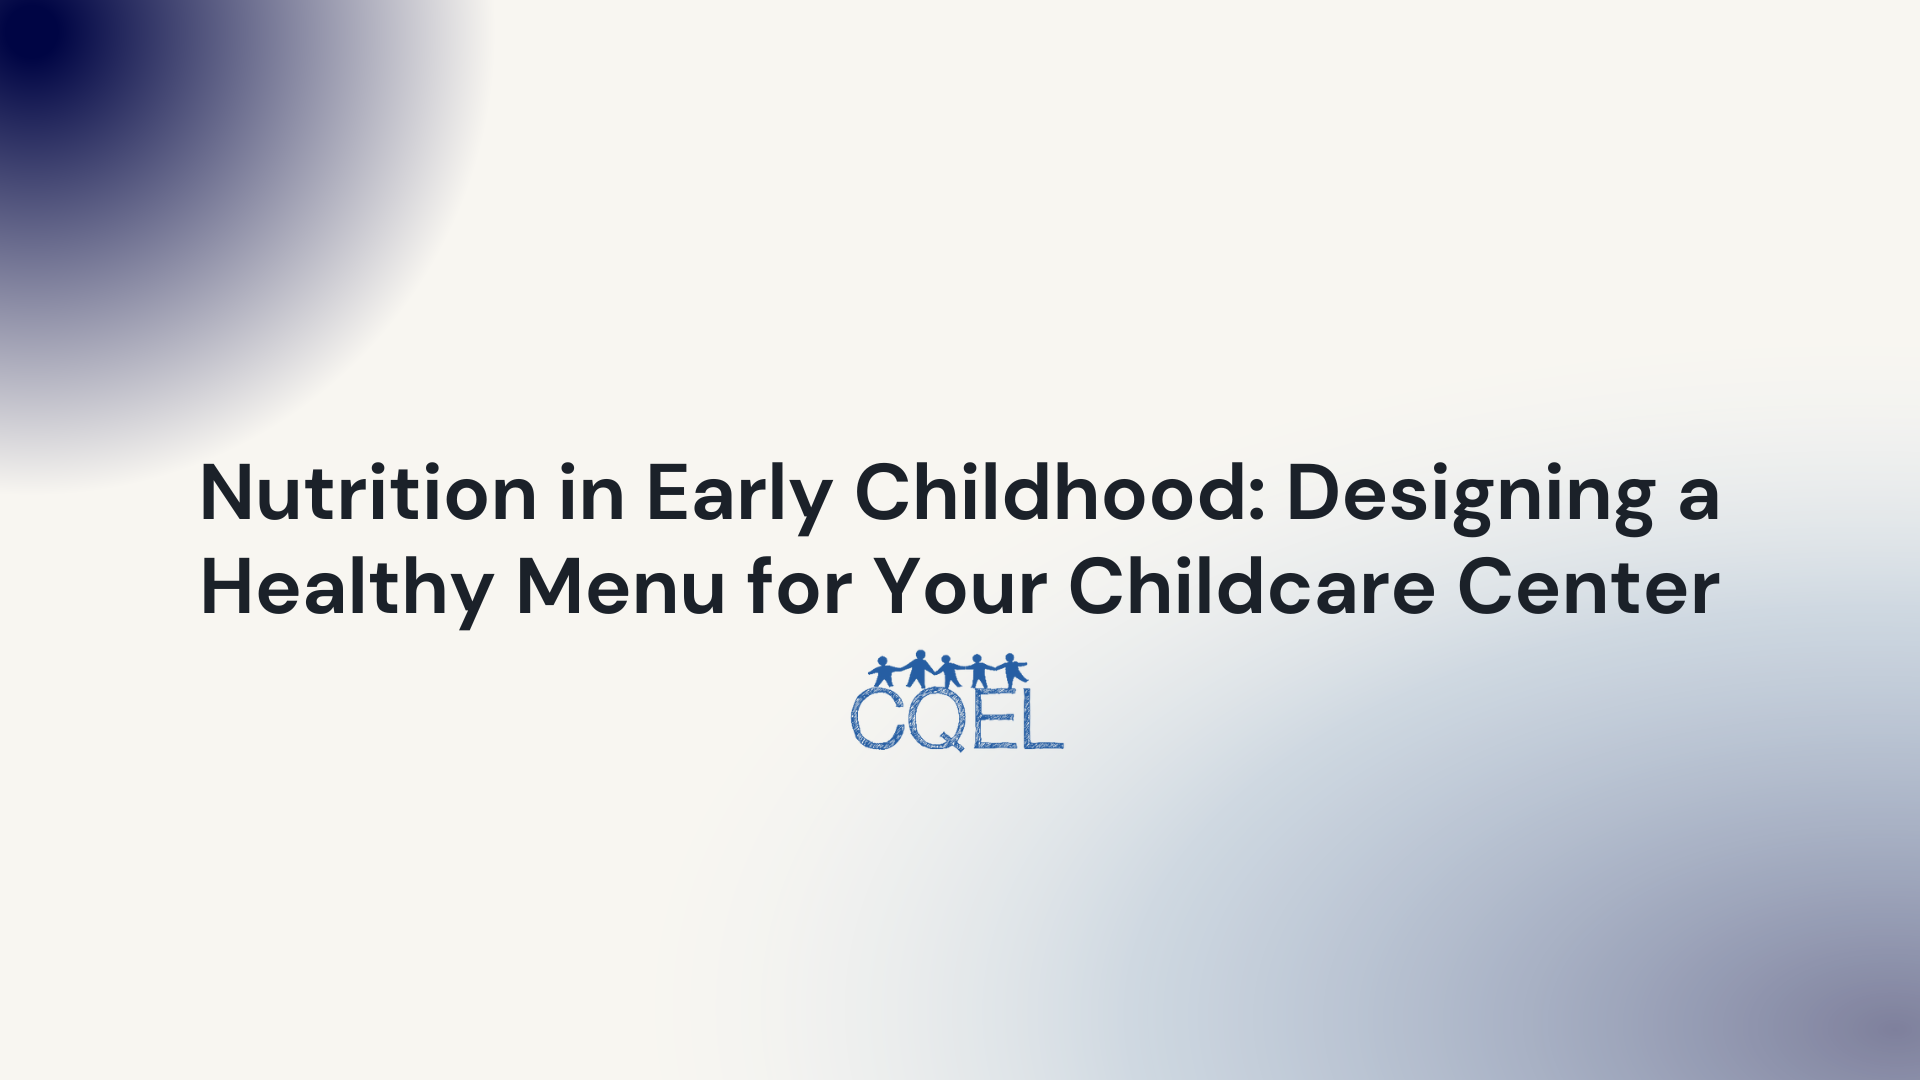 Nutrition in Early Childhood: Designing a Healthy Menu for Your Childcare Center